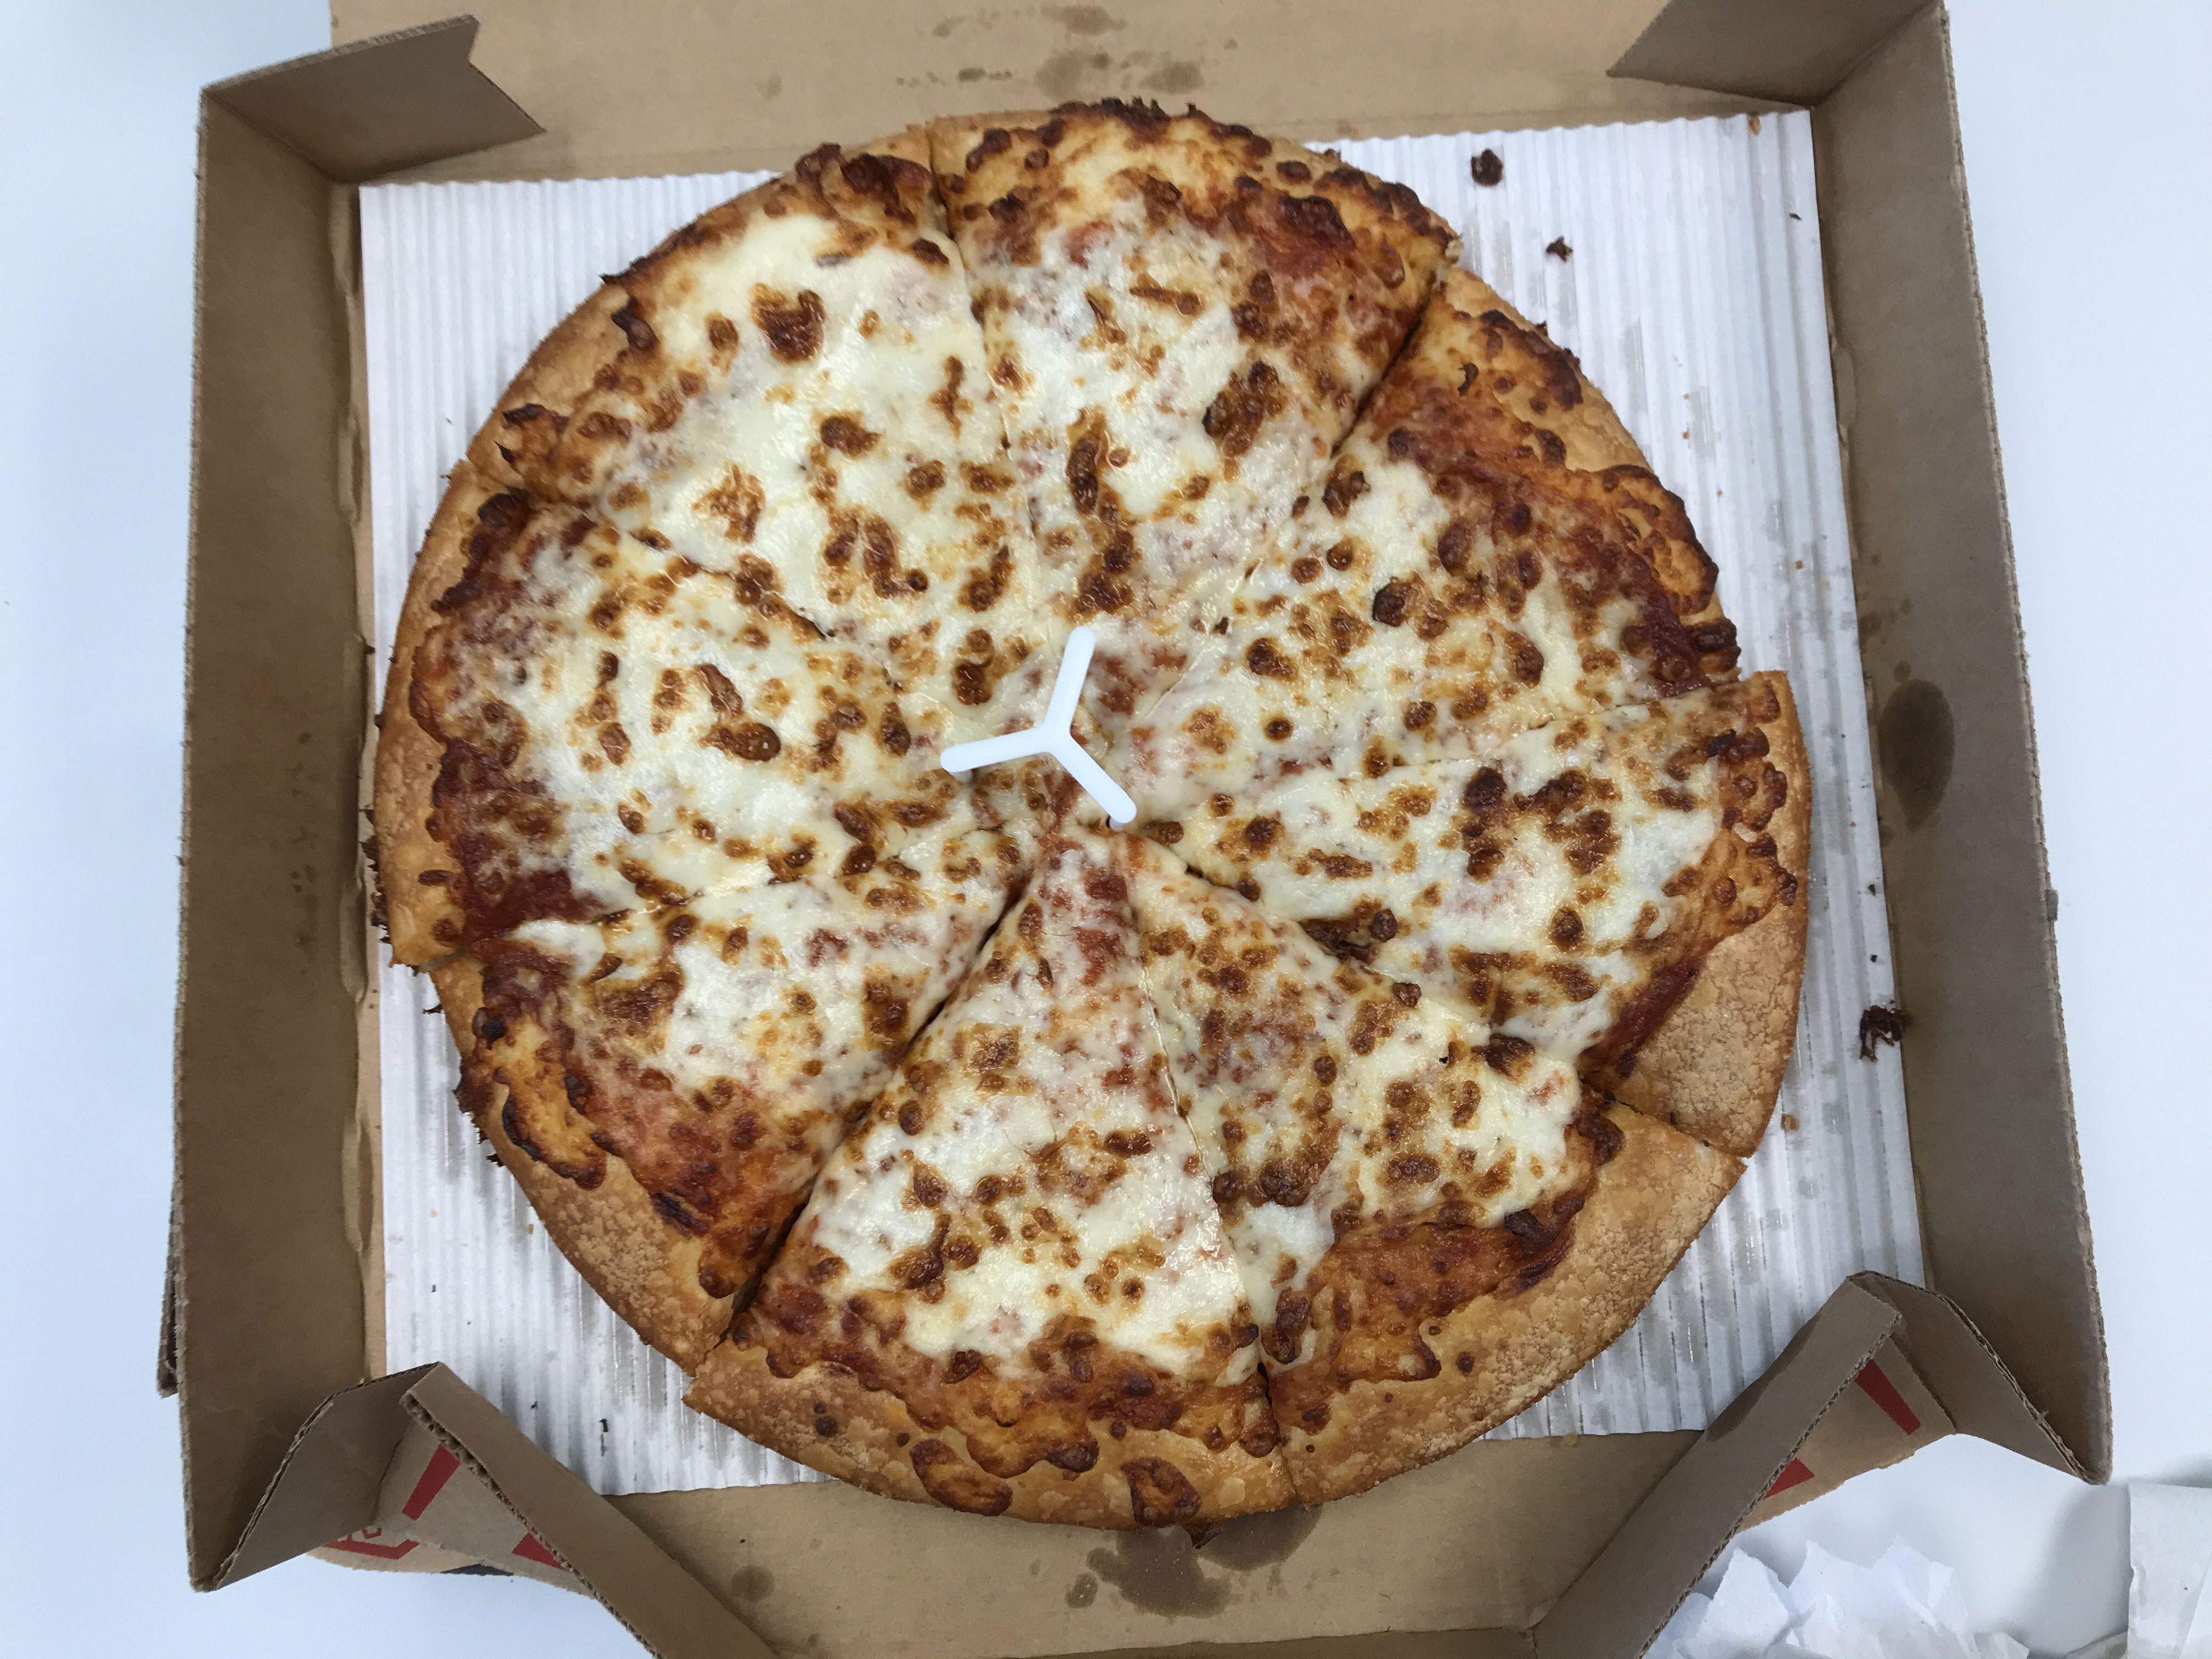 Papa John's Vs. Domino's: Which Is the Best Pizza Chain?